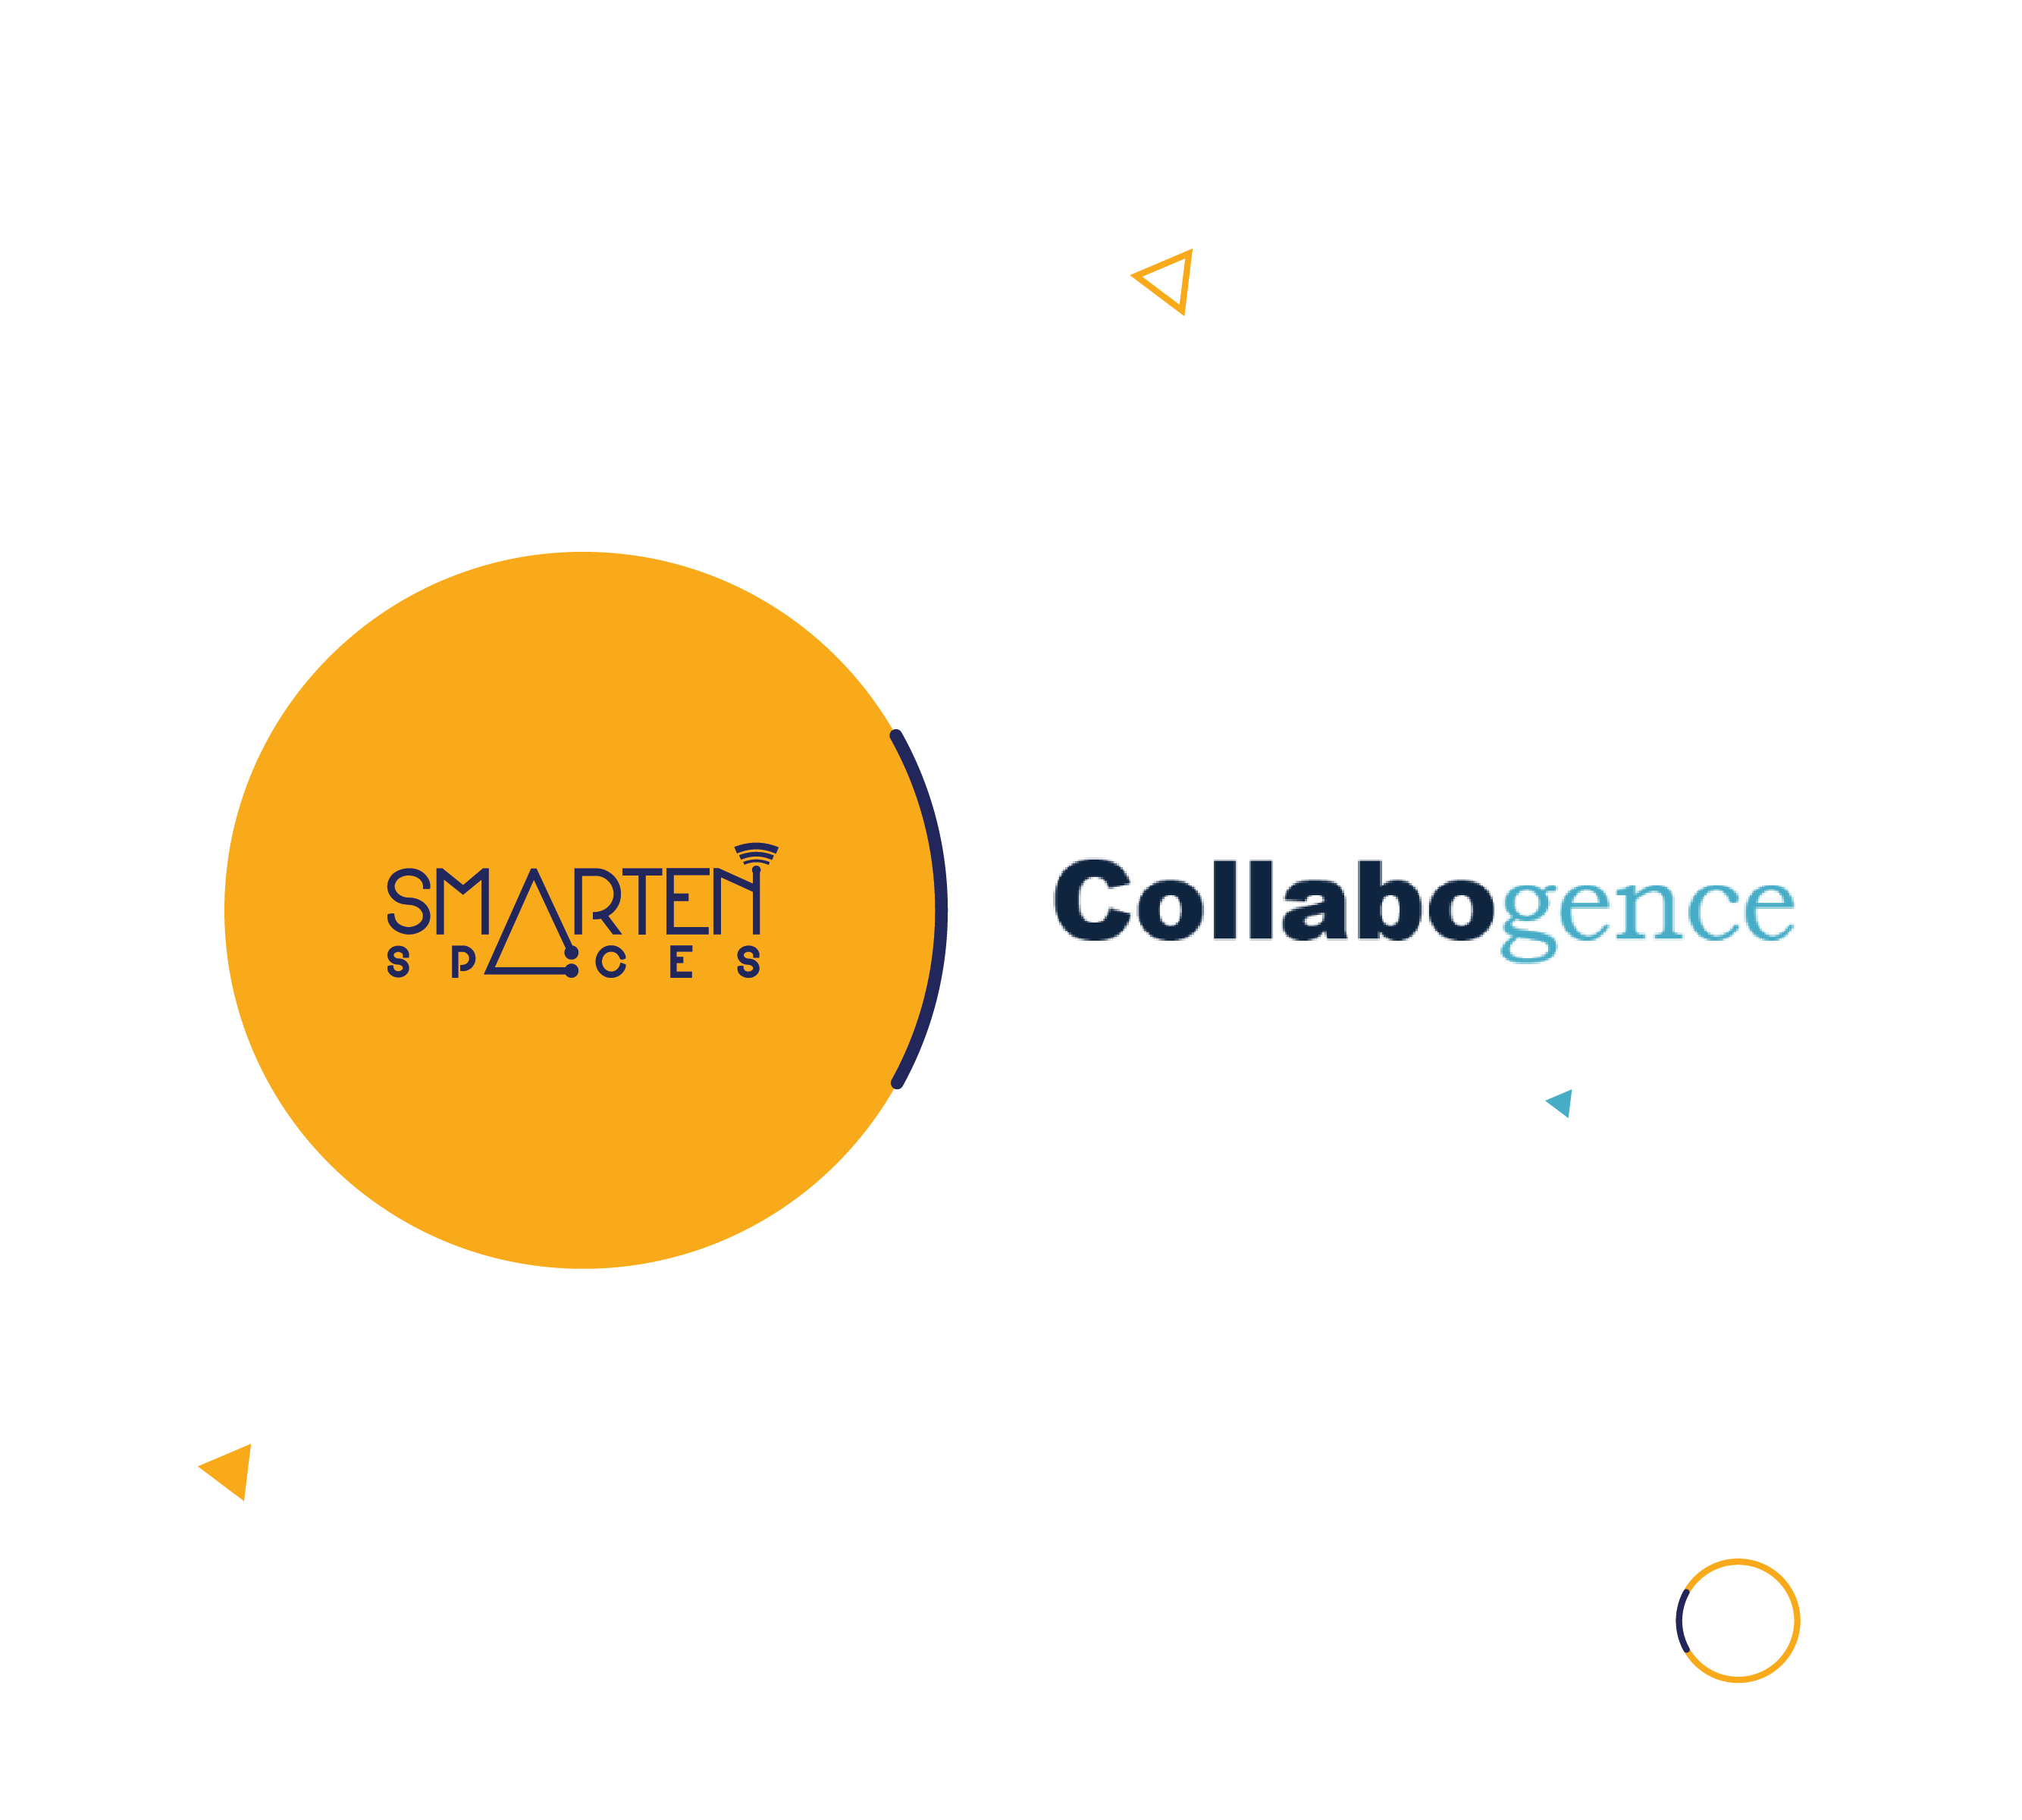 [Report] Smarten Spaces & Collabogence Announce Partnership to Improve Hybrid Work Collaboration & Productivity